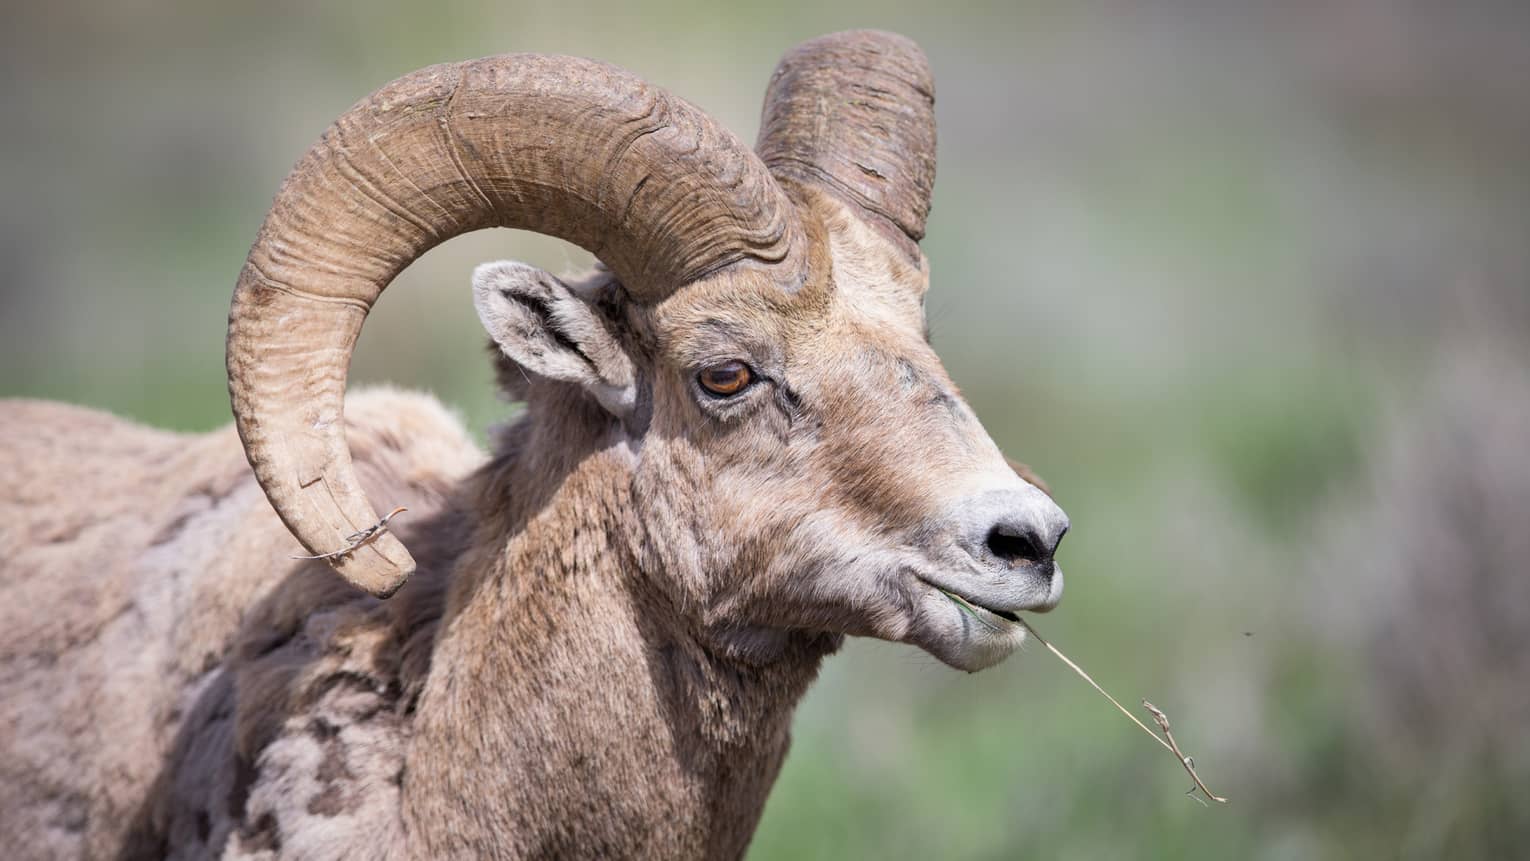 Close-up of mountain goat's head, large curved horns as it chews grass